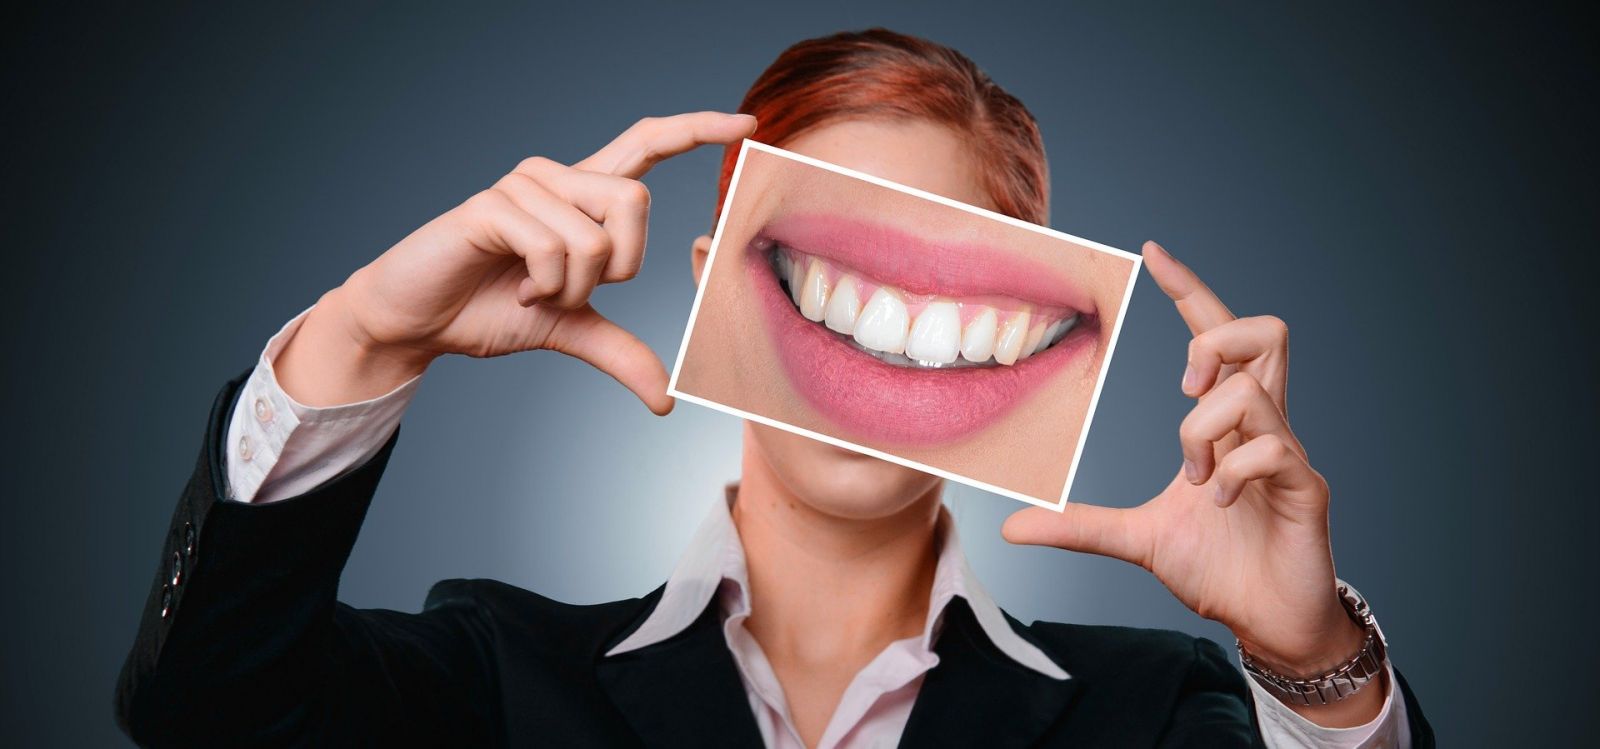 woman holding picture of straight teeth in front of her face